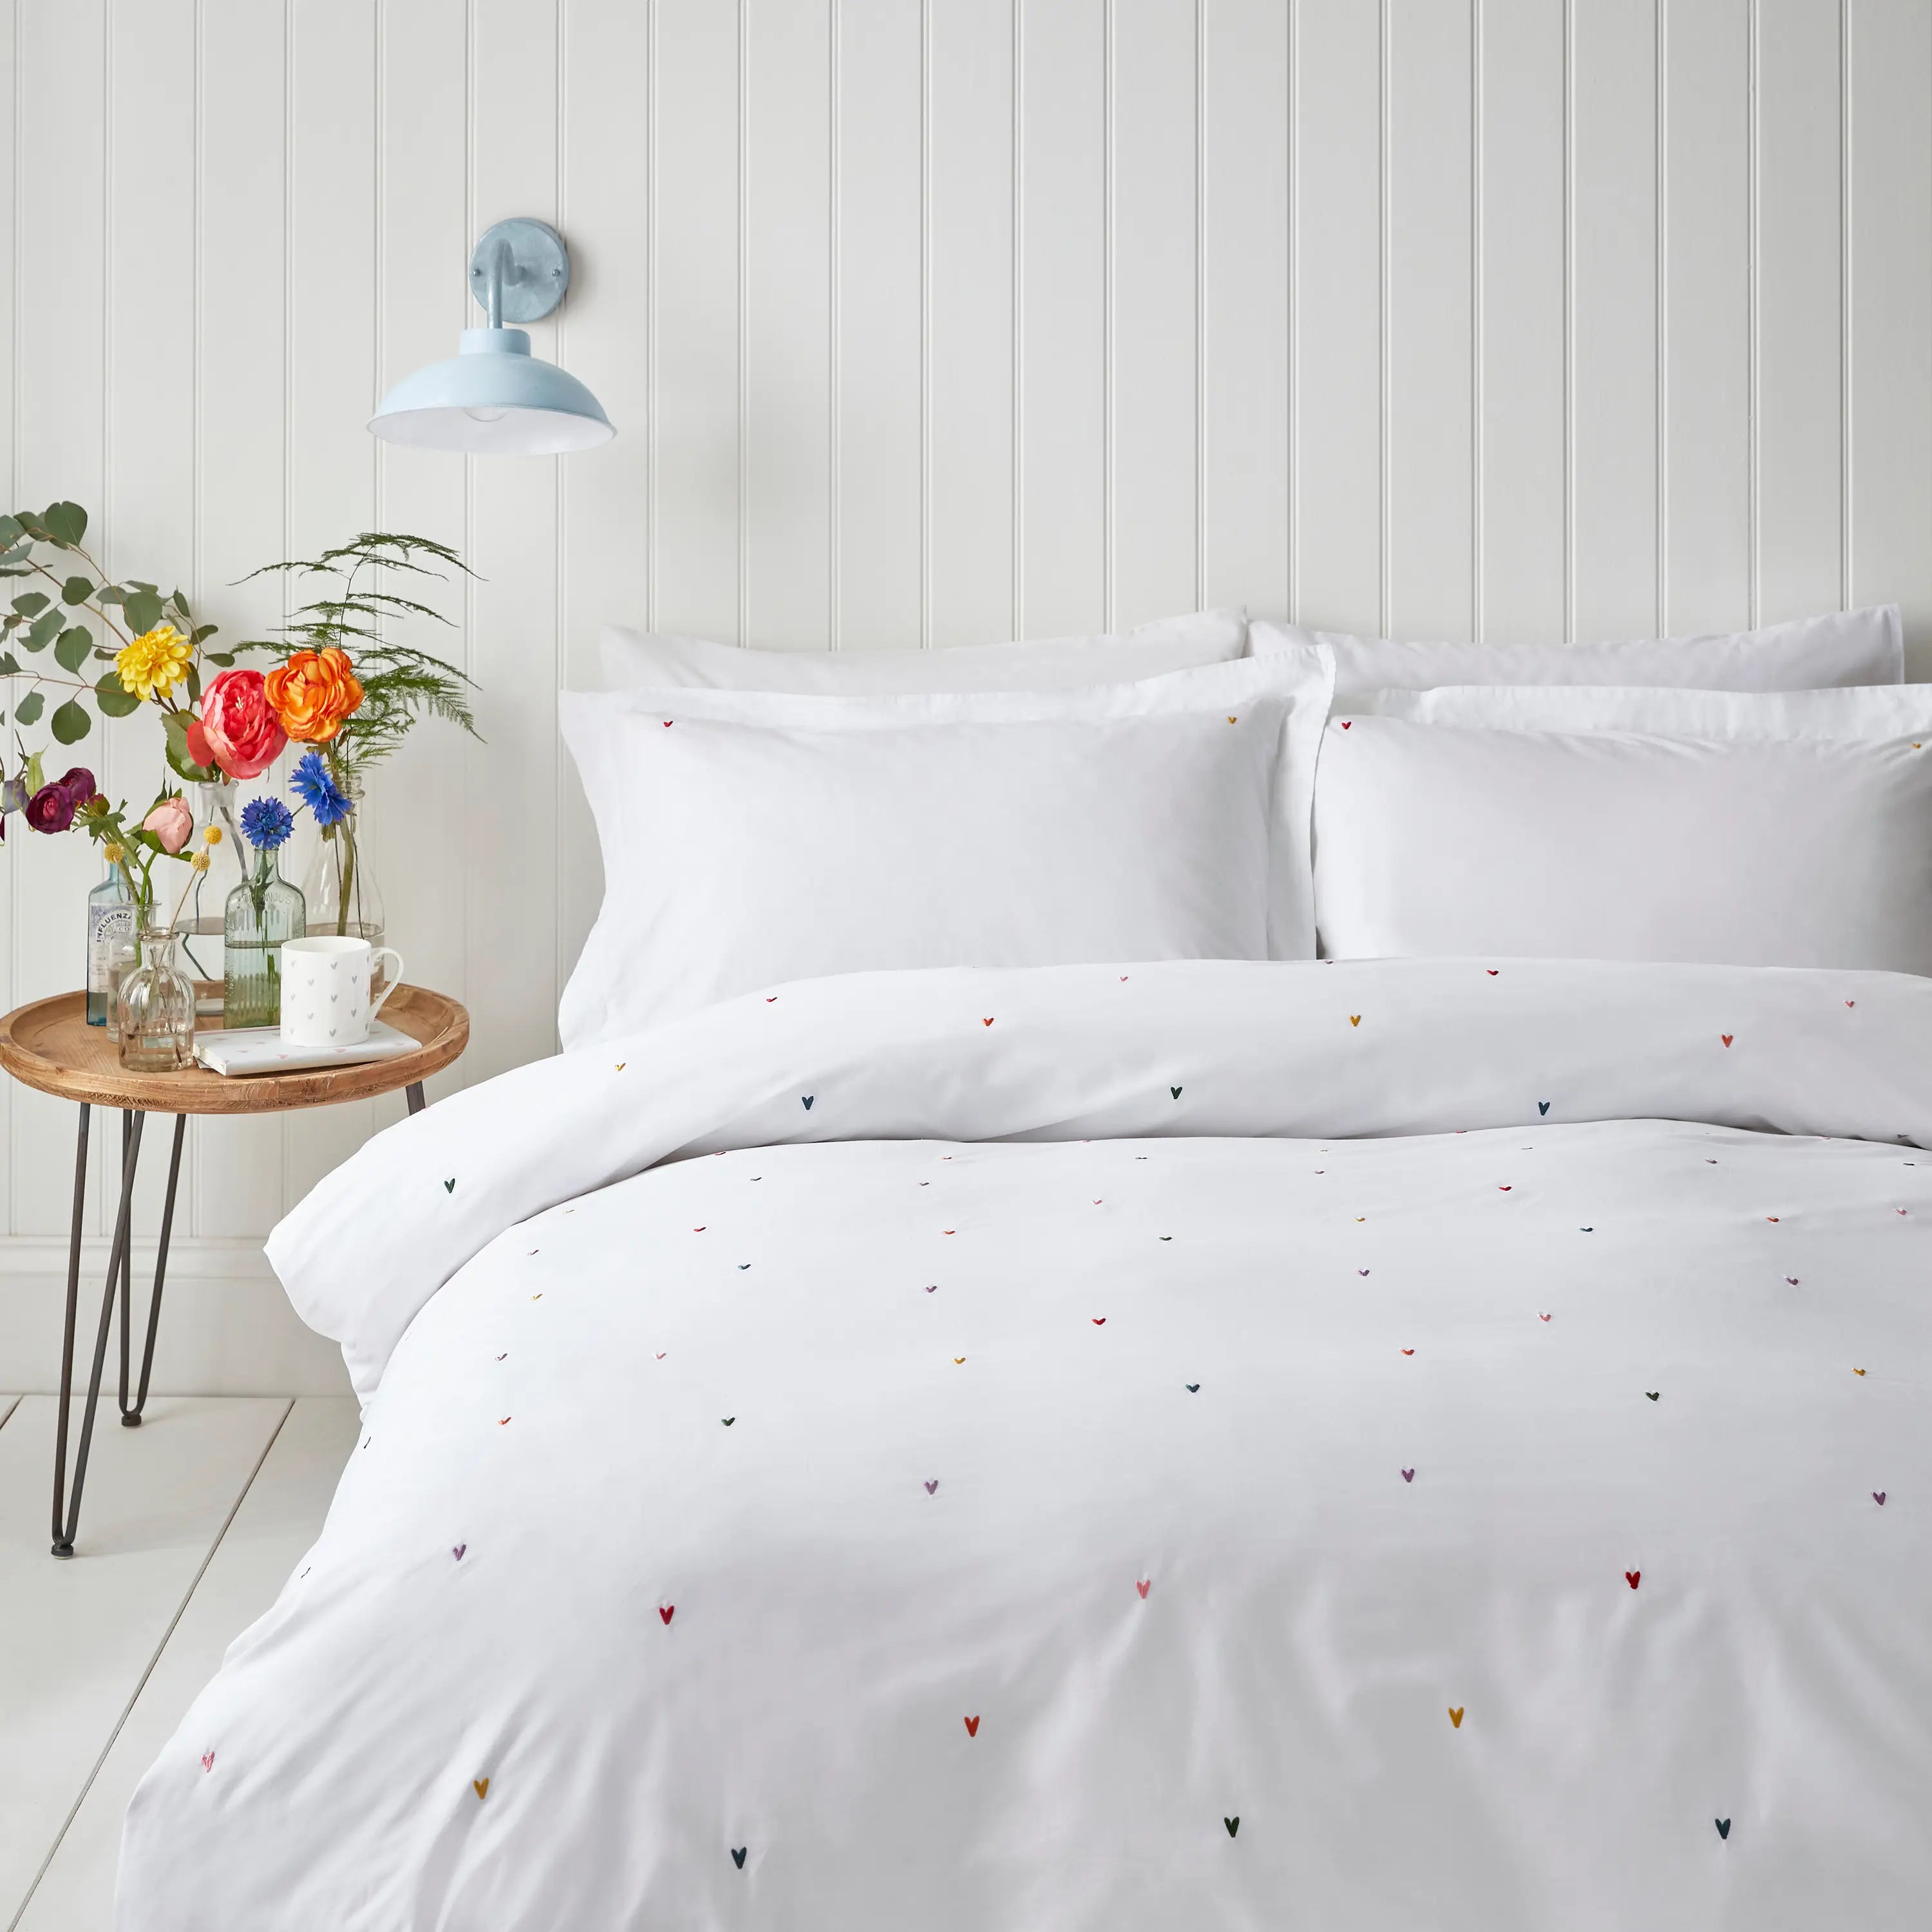 How to Wash Bed Sheets: Cotton, Linen, and More